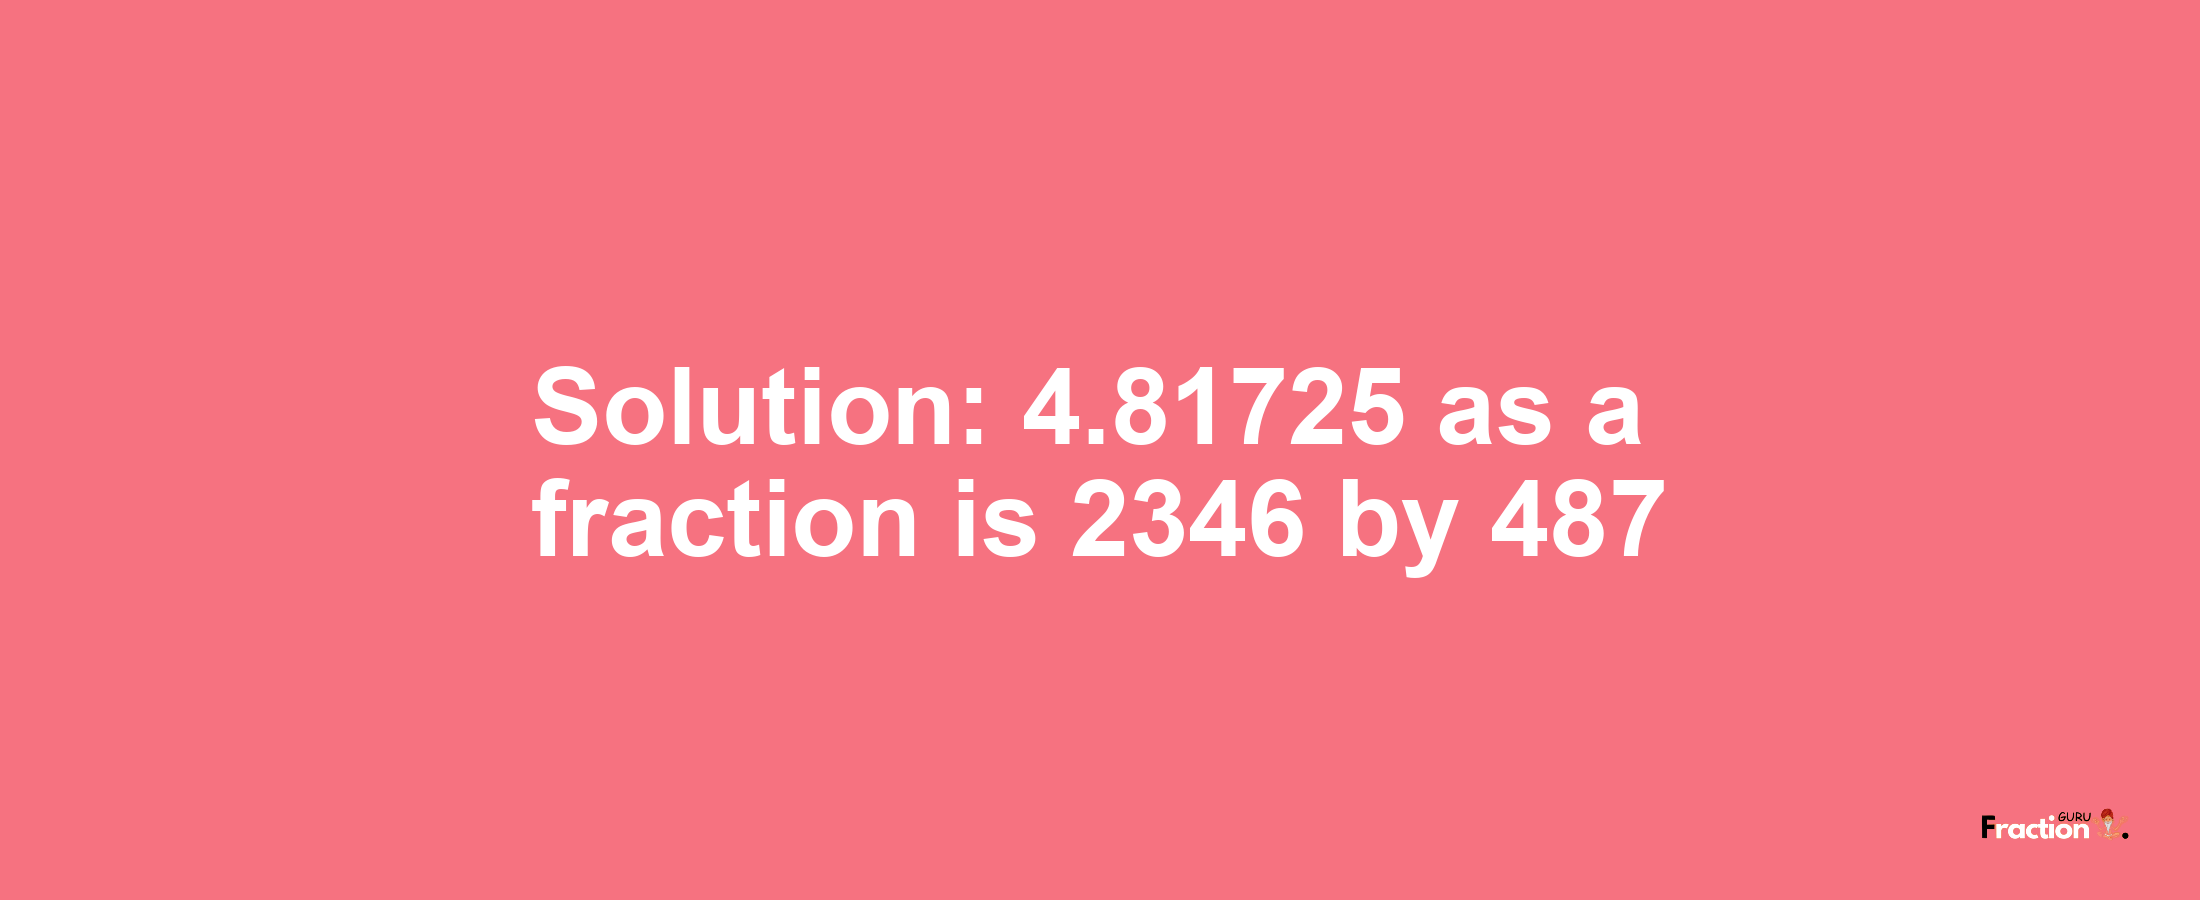 Solution:4.81725 as a fraction is 2346/487